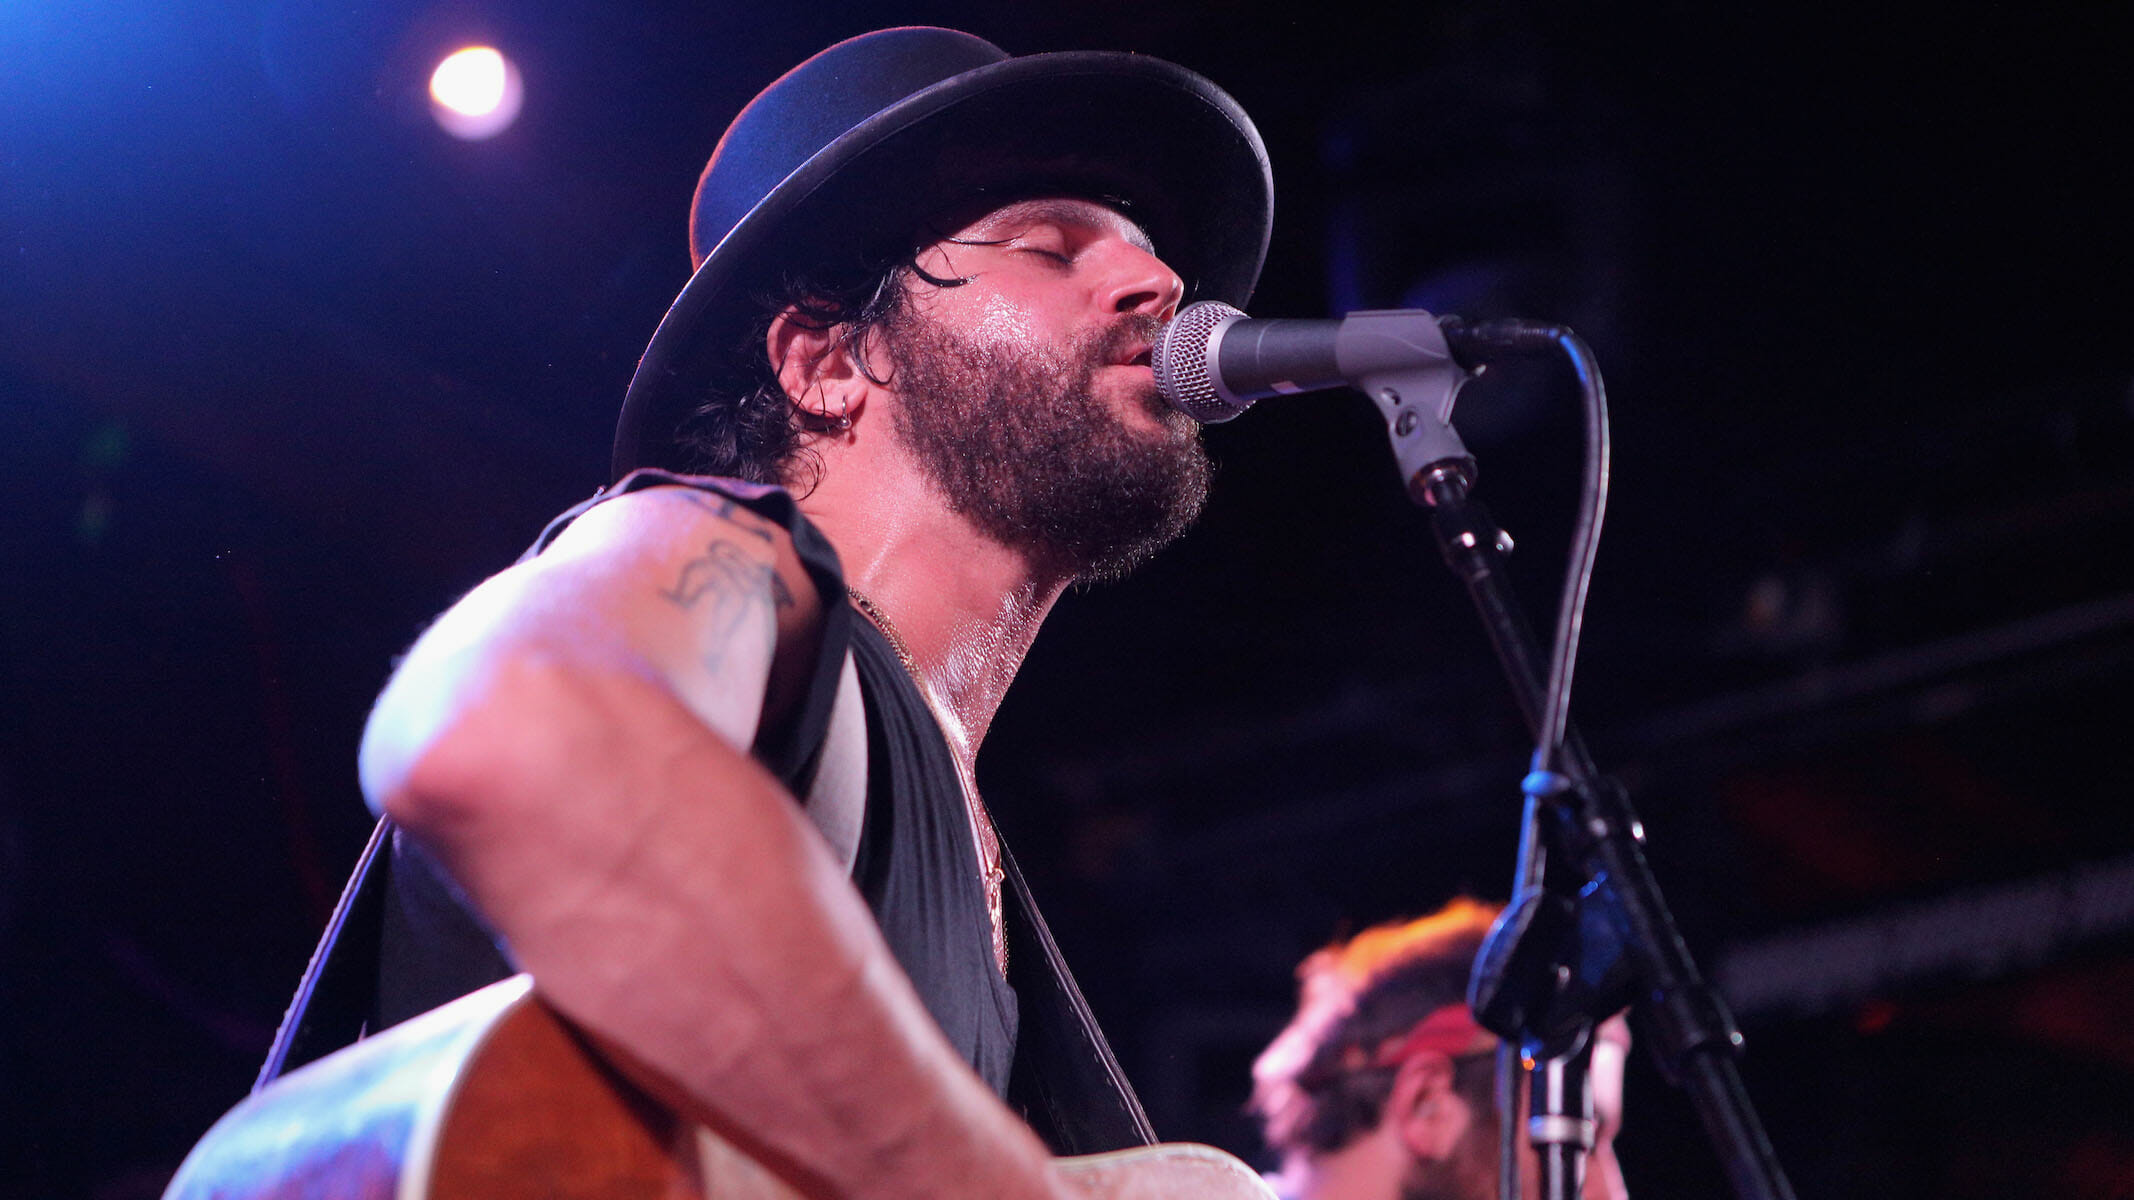 Inaugural Sound Mind Event to Feature Torres, Langhorne Slim and More, Raising Awareness for Mental Health in Music